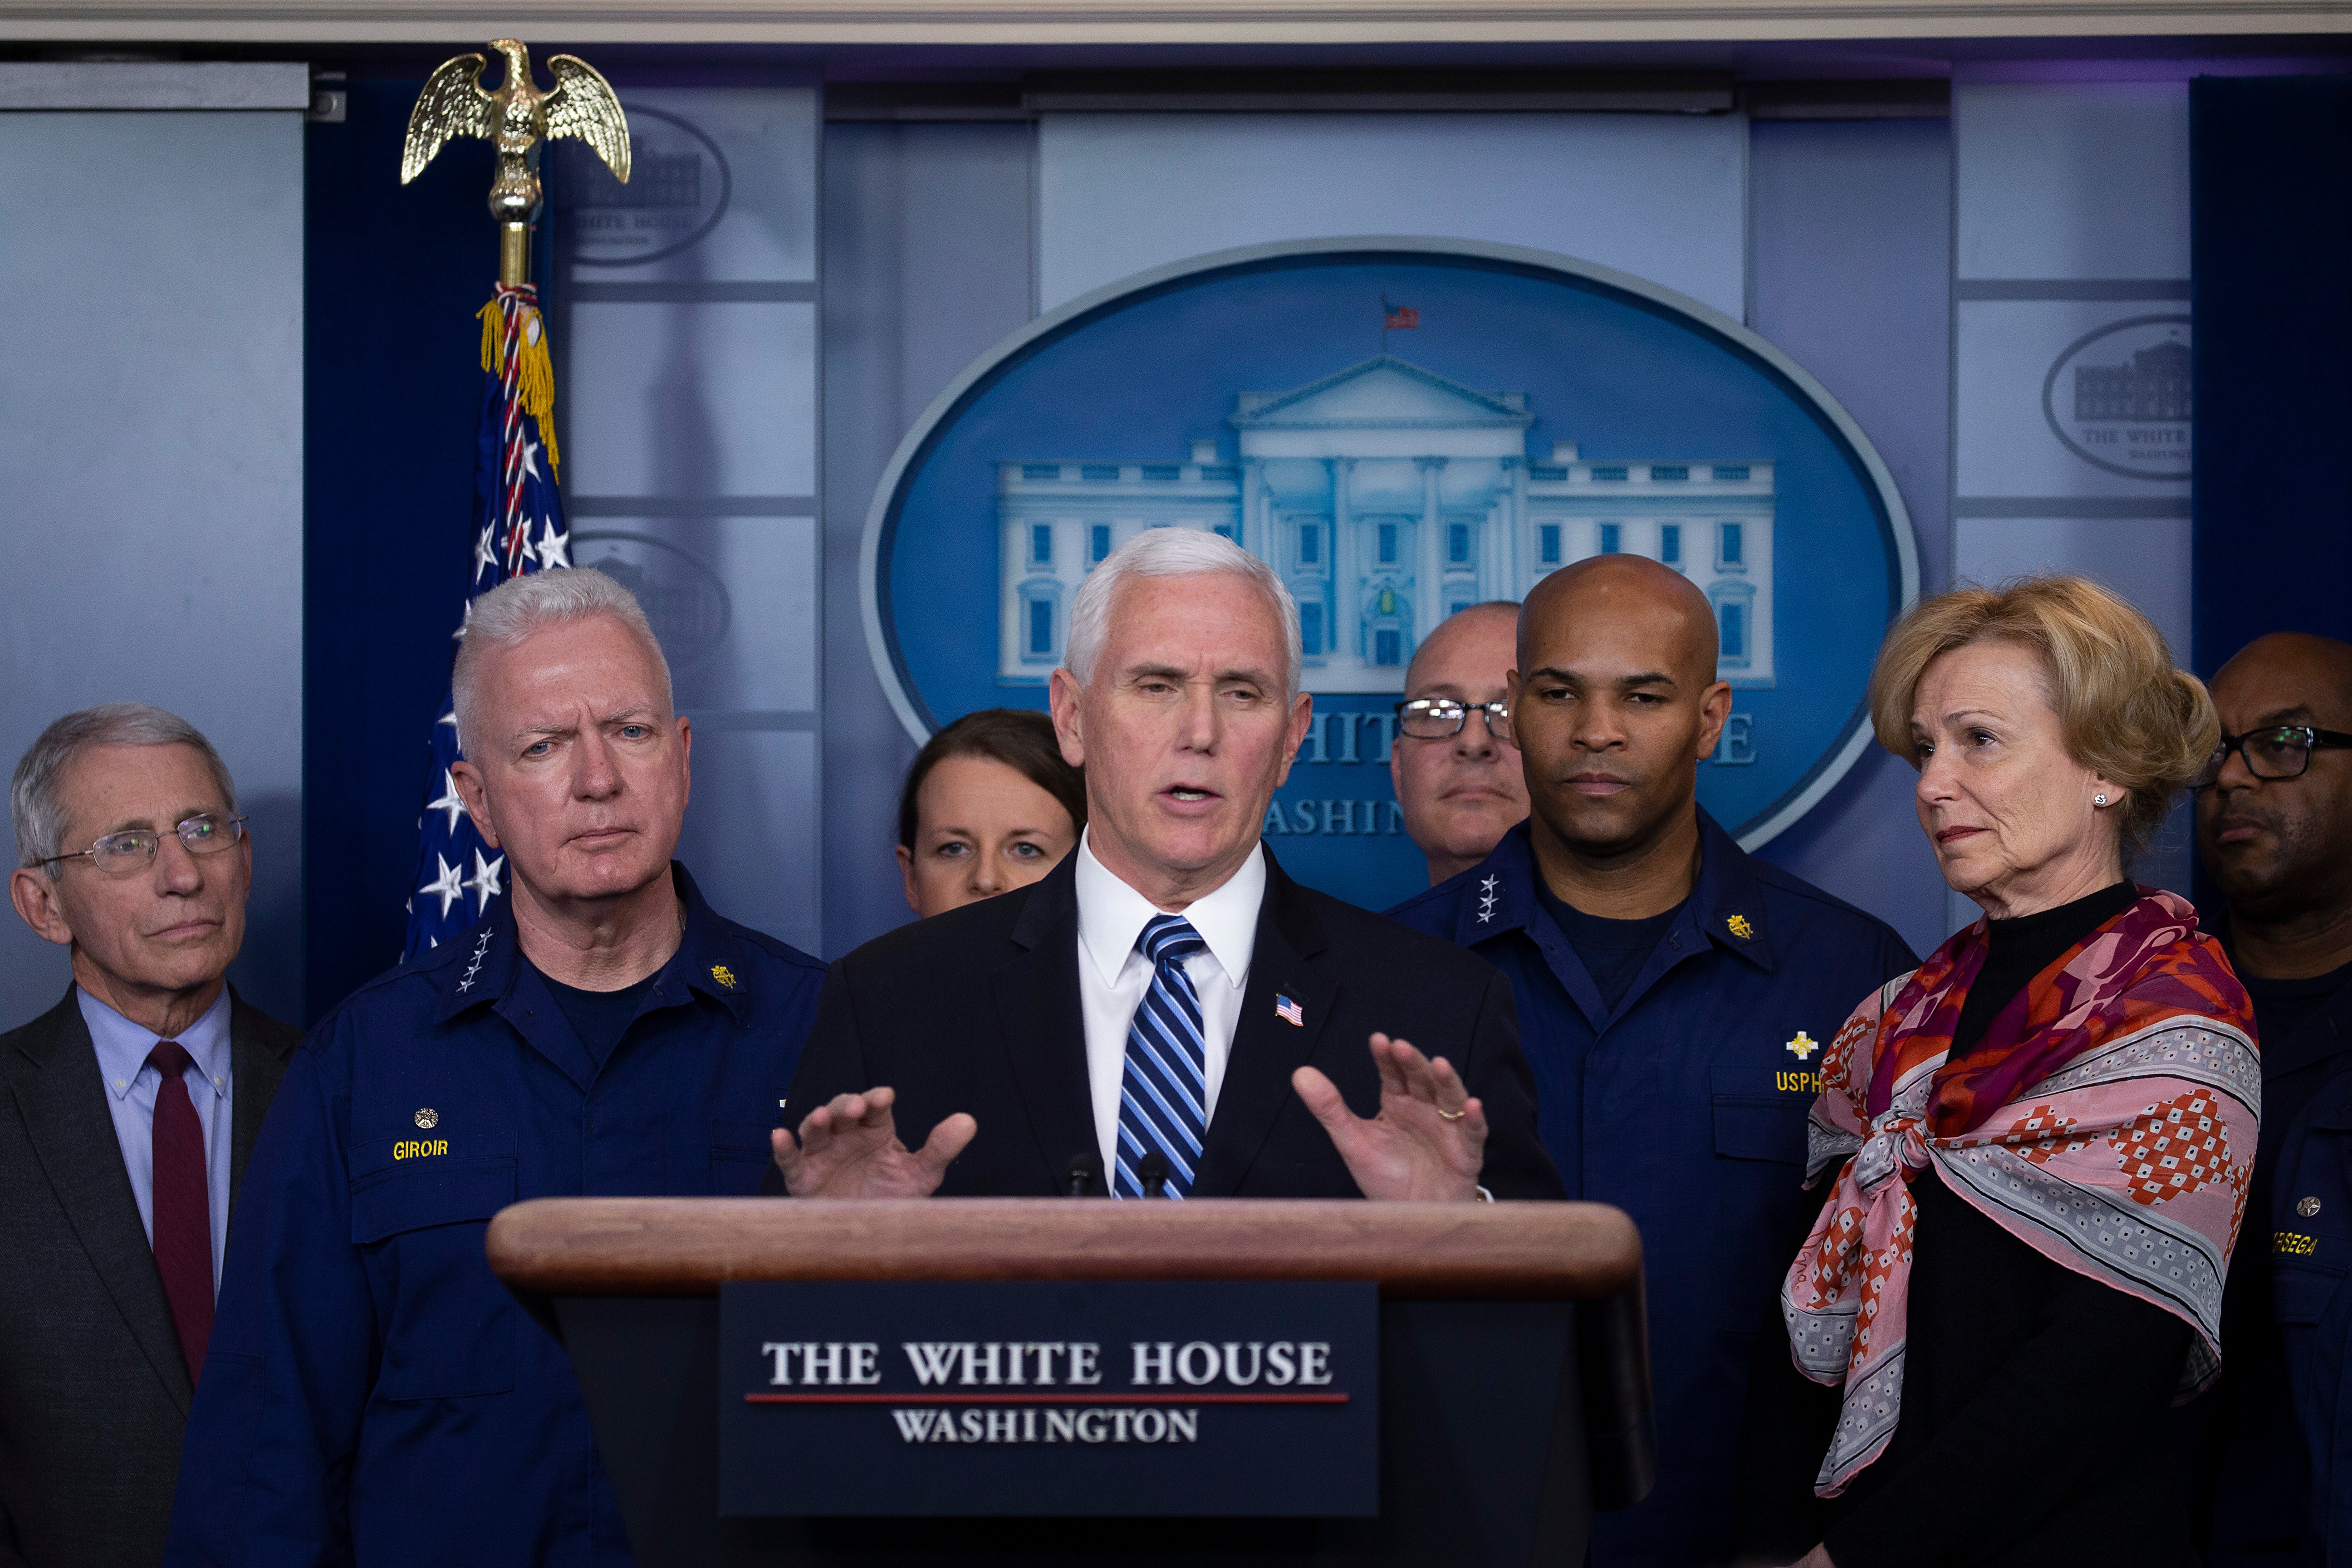 WASHINGTON, DC - MARCH 15: Vice President Mike Pence speaks to the media in the press briefing room at the White House on March 15, 2020 in Washington, DC. The United States has surpassed 3,000 confirmed cases of the coronavirus, and the death toll climbed to at least 61, with 25 of the deaths associated with the Life Care Center in Kirkland, Washington. (Photo by Tasos Katopodis/Getty Images)